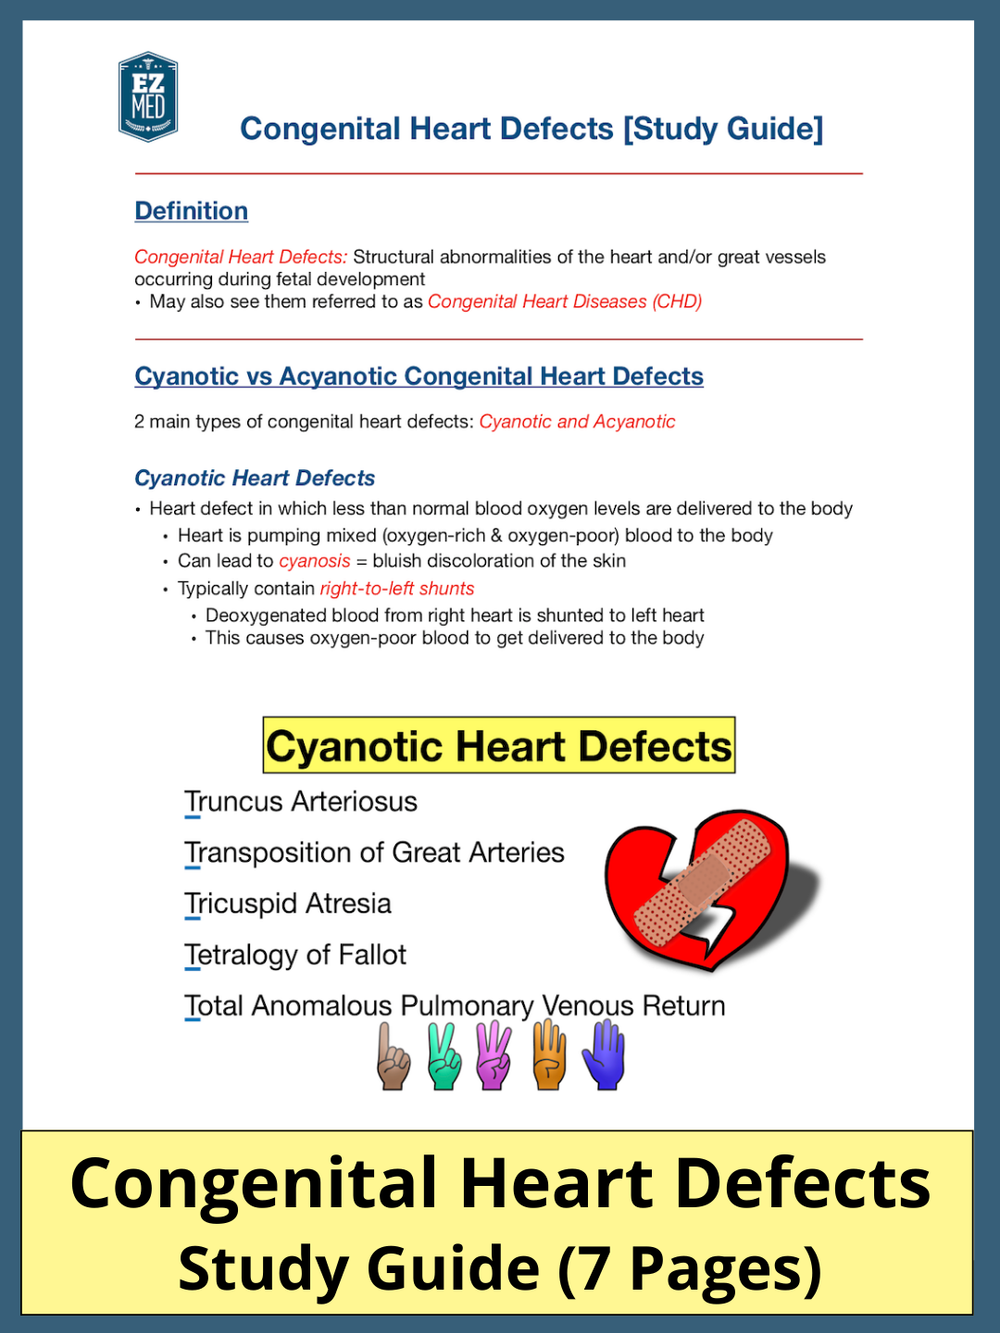 Learn about Congenital Heart Defects